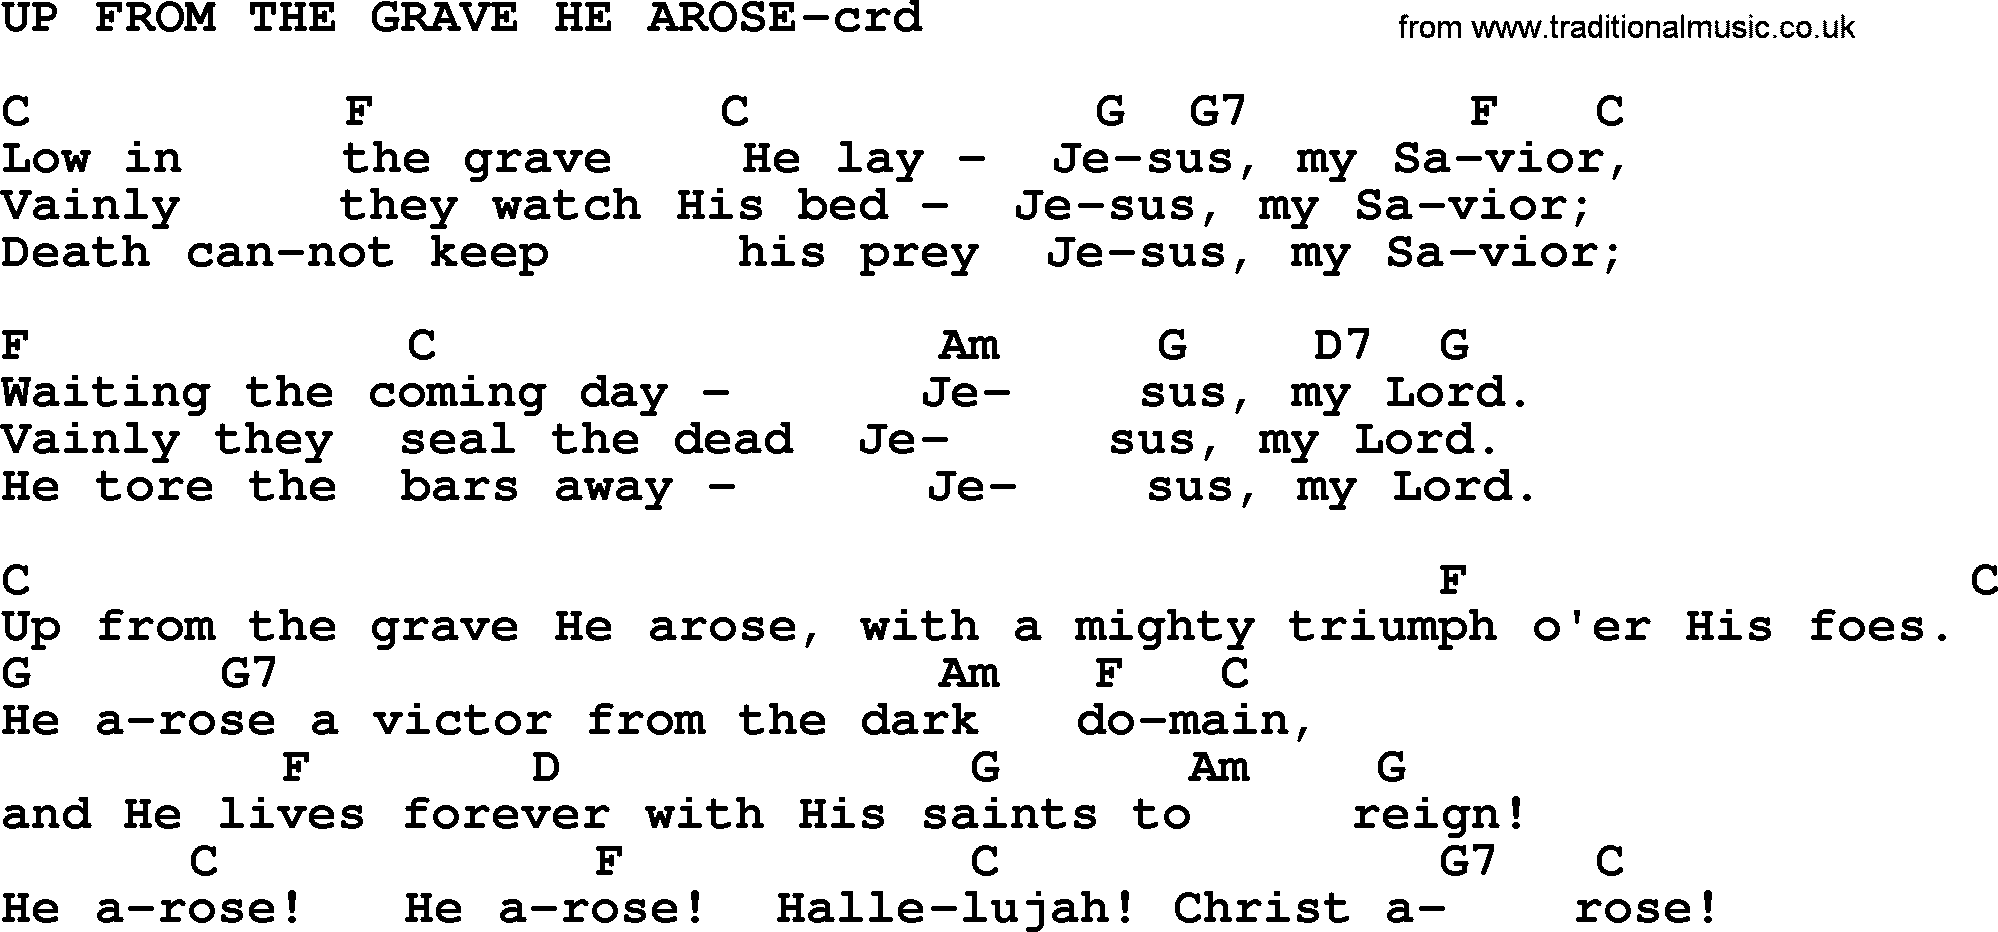 Top 500 Hymn: Up From The Grave He Arose, lyrics and chords